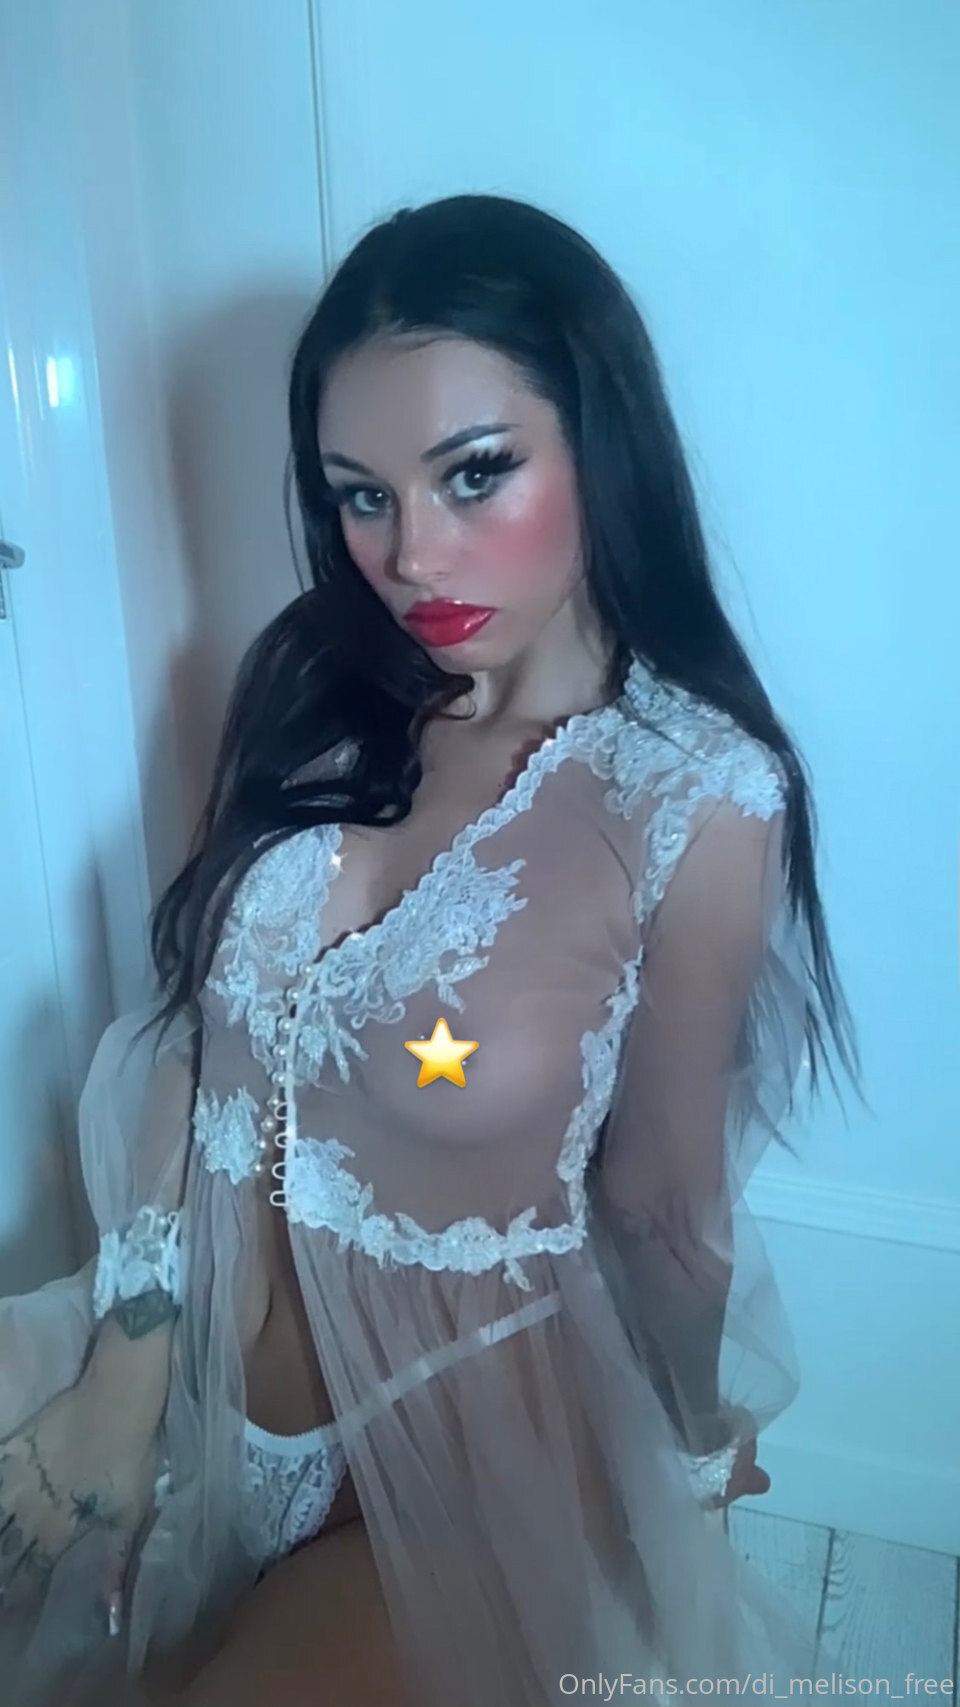 Only Fans Диана Мелисон